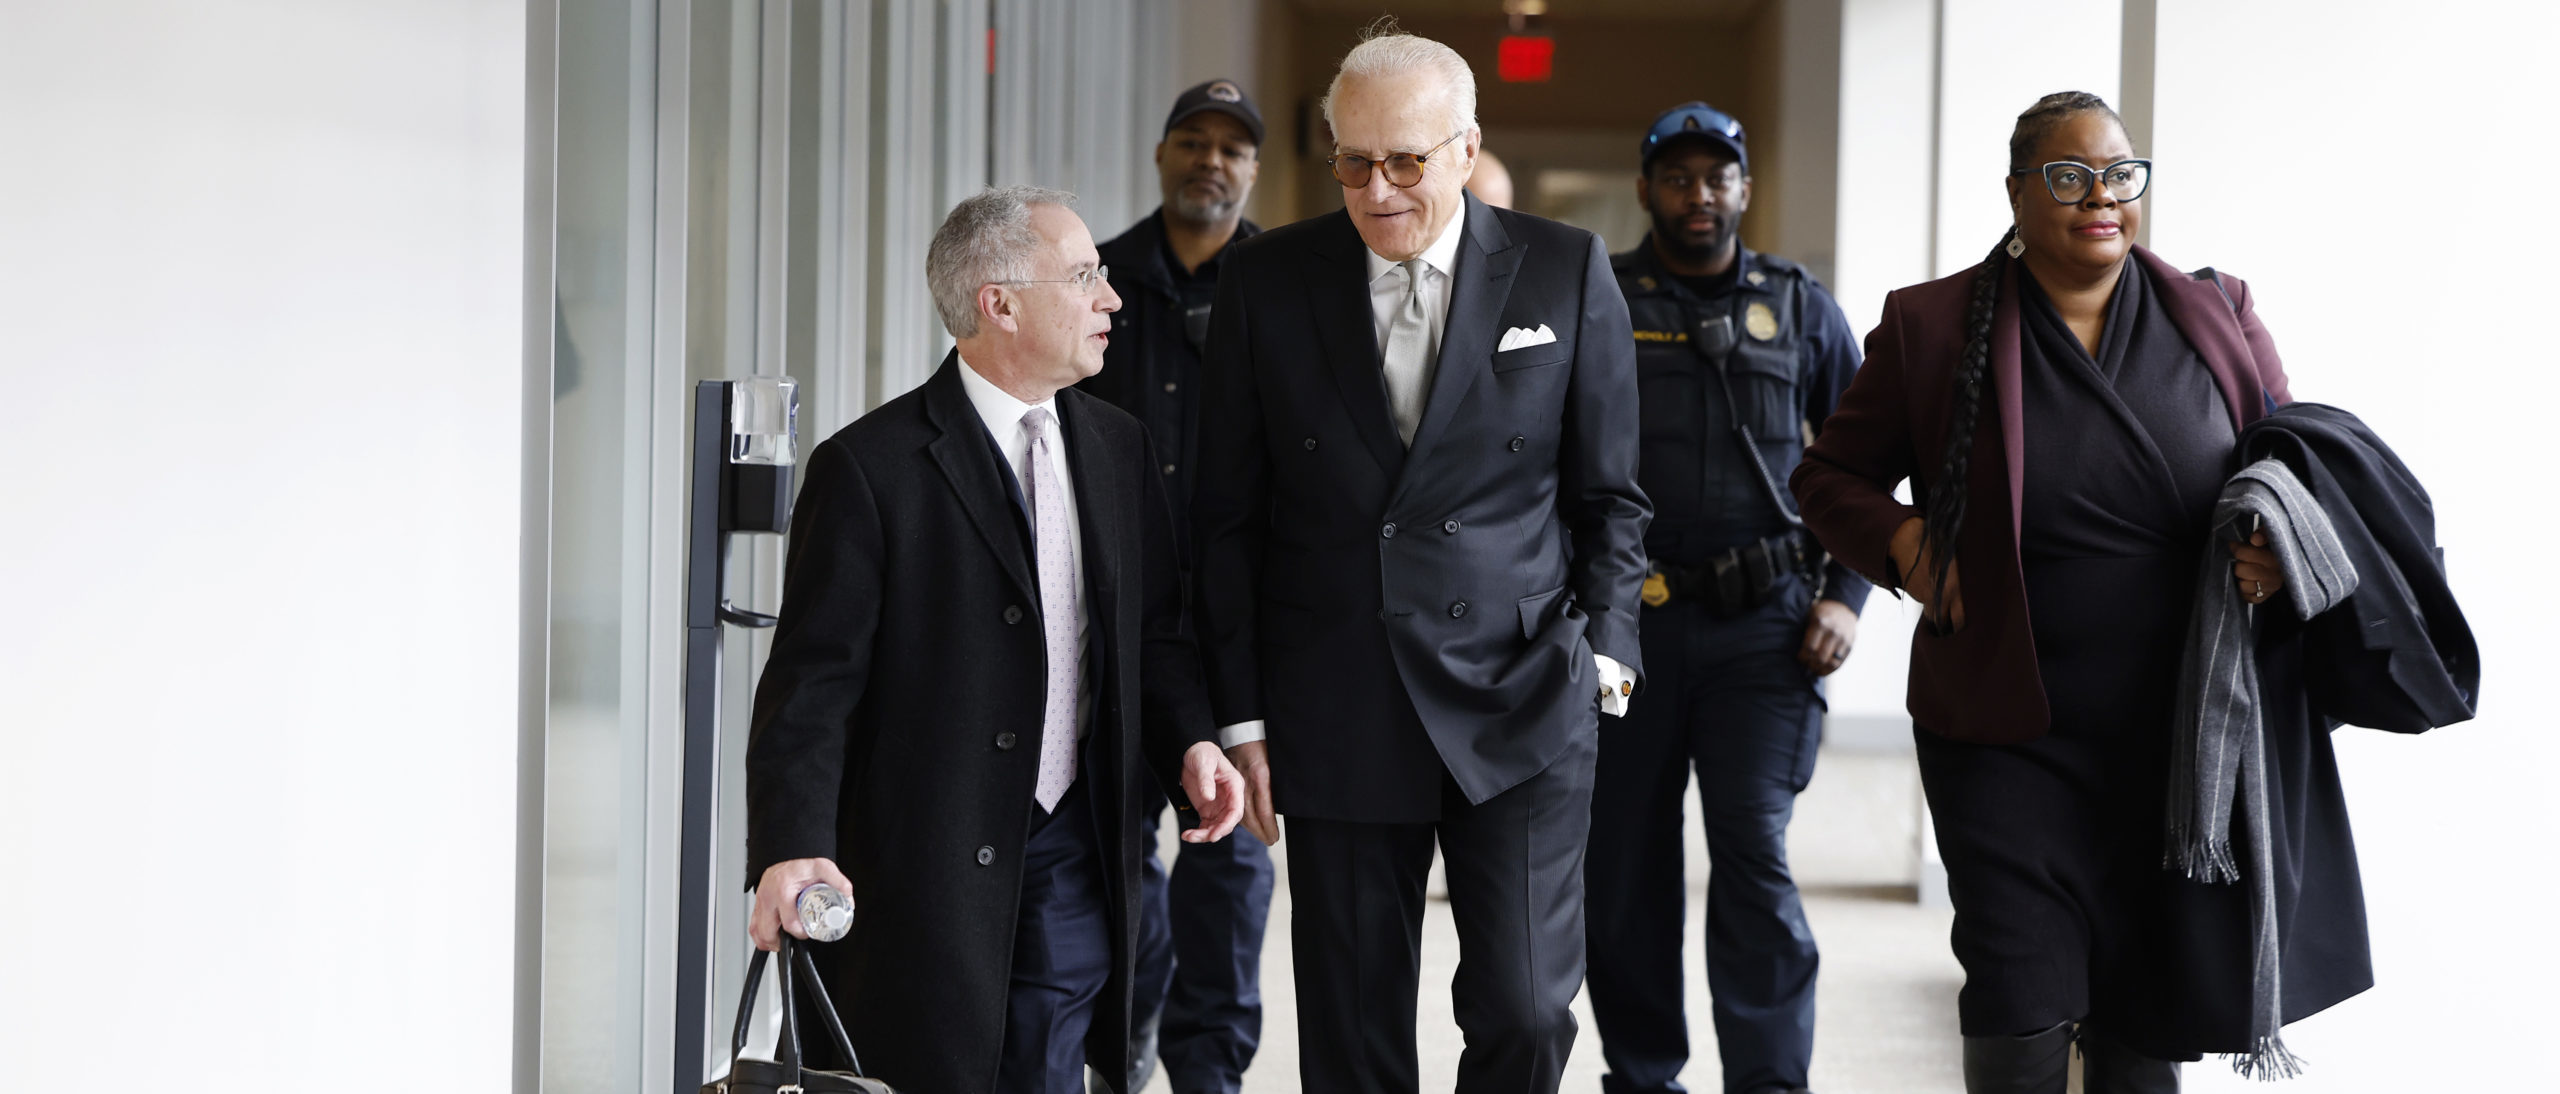 James Biden, a consultant and brother of President Joe Biden arrives with attorney Paul Fishman for a closed door deposition with the House Oversight Committee at the Thomas P. O'Neill Jr. Federal Building on February 21, 2024 in Washington, D.C. (Photo by Anna Moneymaker/Getty Images)